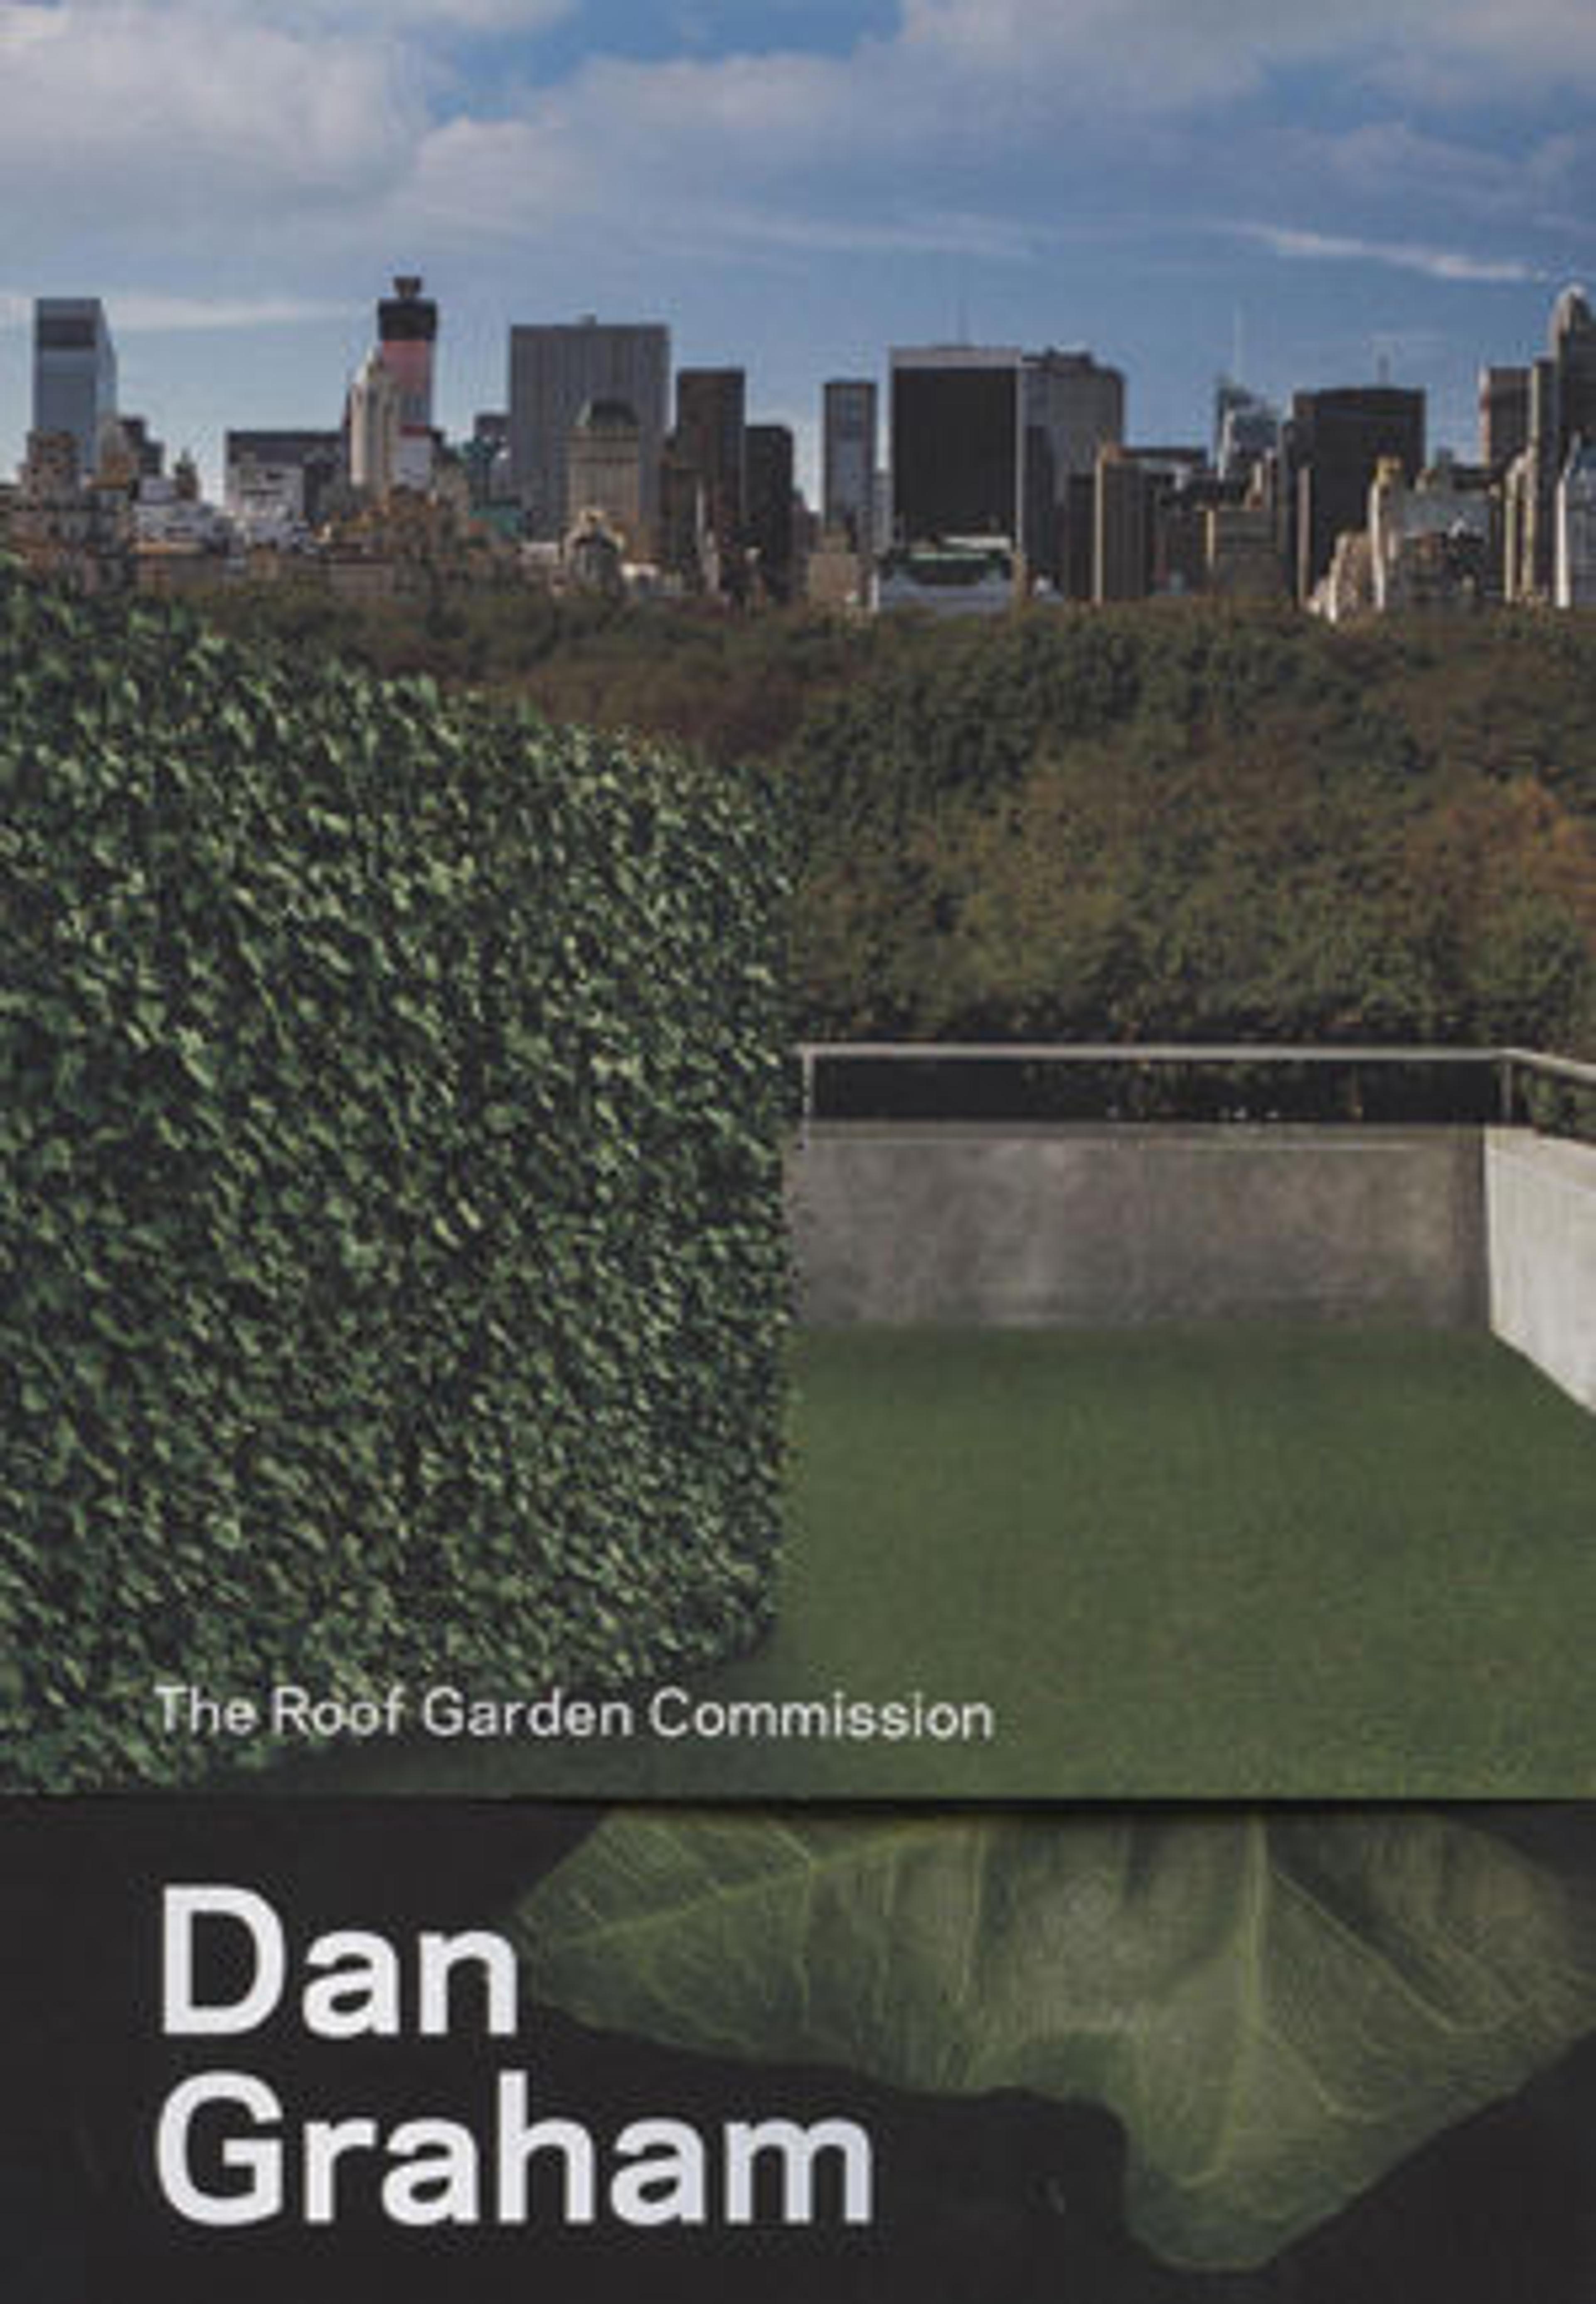 Dan Graham: The Roof Garden Commission, with essay by Ian Alteveer and interview by Sheena Wagstaff